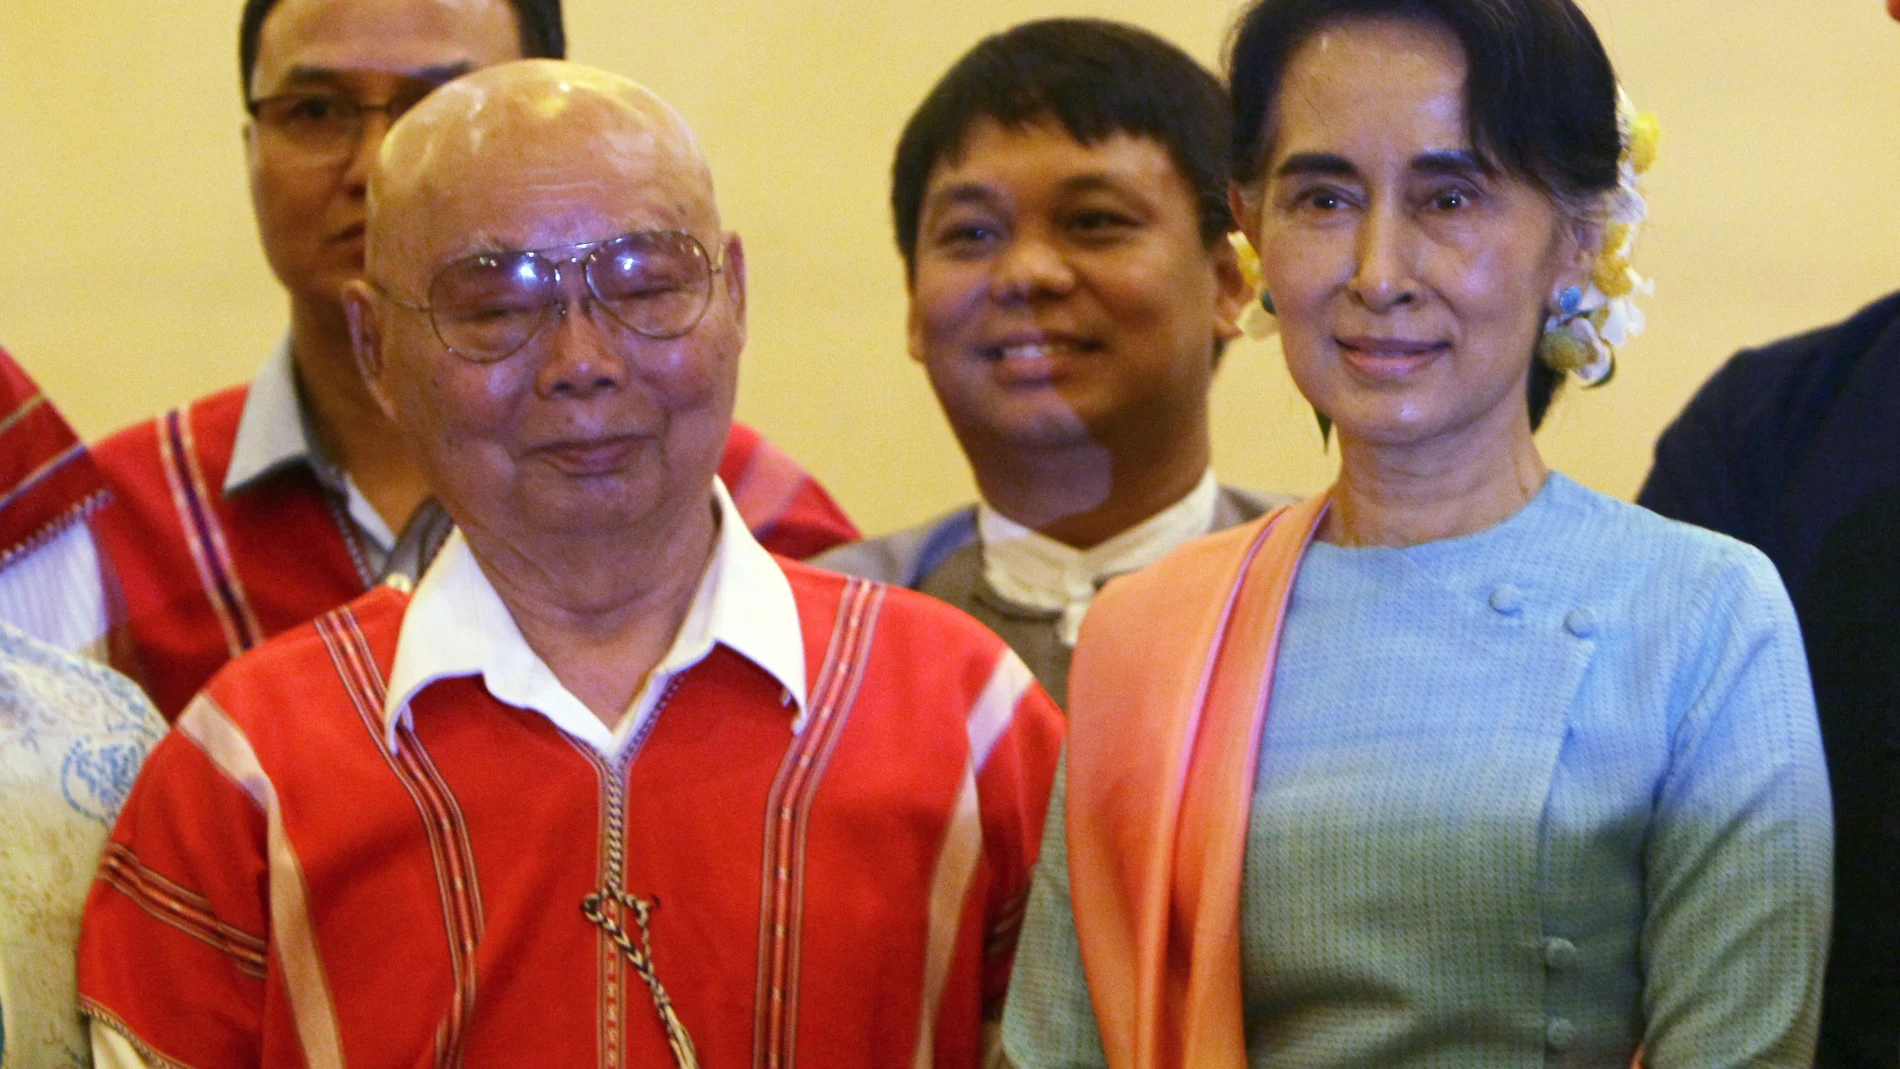 FILE - In this Aug. 24, 2016, file photo, then Myanmar's Foreign Minister Aung San Suu Kyi, right, and Mutu Say Po, chairman of Karen National Union (KNU) pose for photos during their meeting at a hotel in Naypyitaw, Myanmar days before a peace conference that seeks to end decades of armed conflict with ethnic minority groups. The future of the Myanmarâ€™s already-fragile peace process between the military, ethnic armed groups and militias is in question as the military regains control of the country after Feb. 1, 2021 coup. (AP Photo/Aung Shine Oo, File)